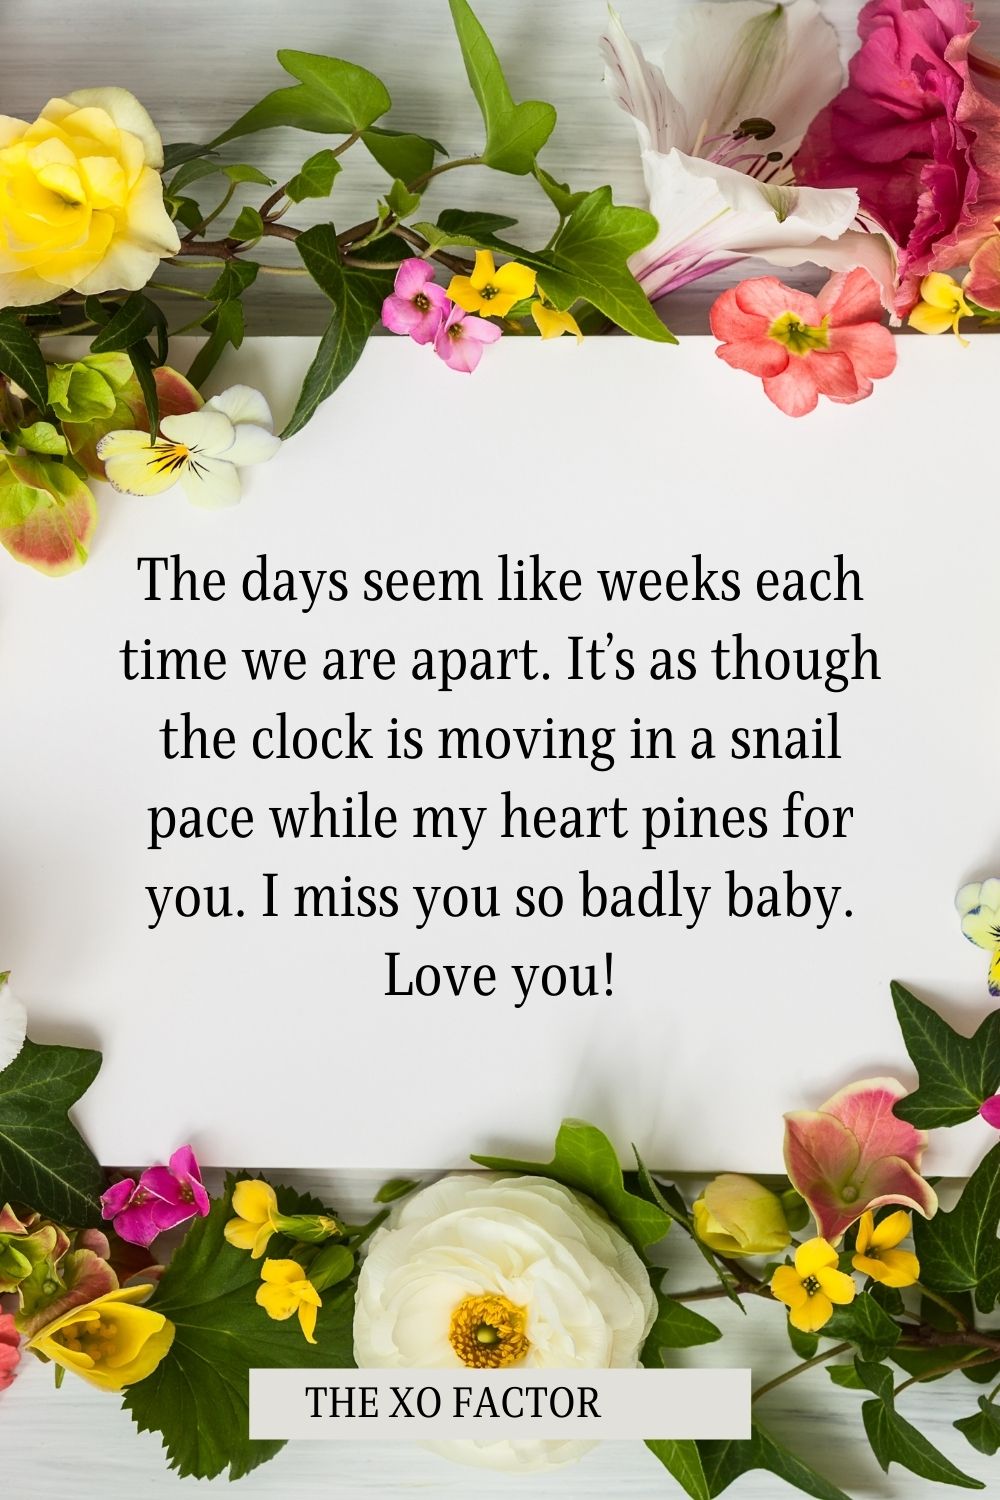 The days seem like weeks each time we are apart. It’s as though the clock is moving in a snail pace while my heart pines for you. I miss you so badly baby. Love you!